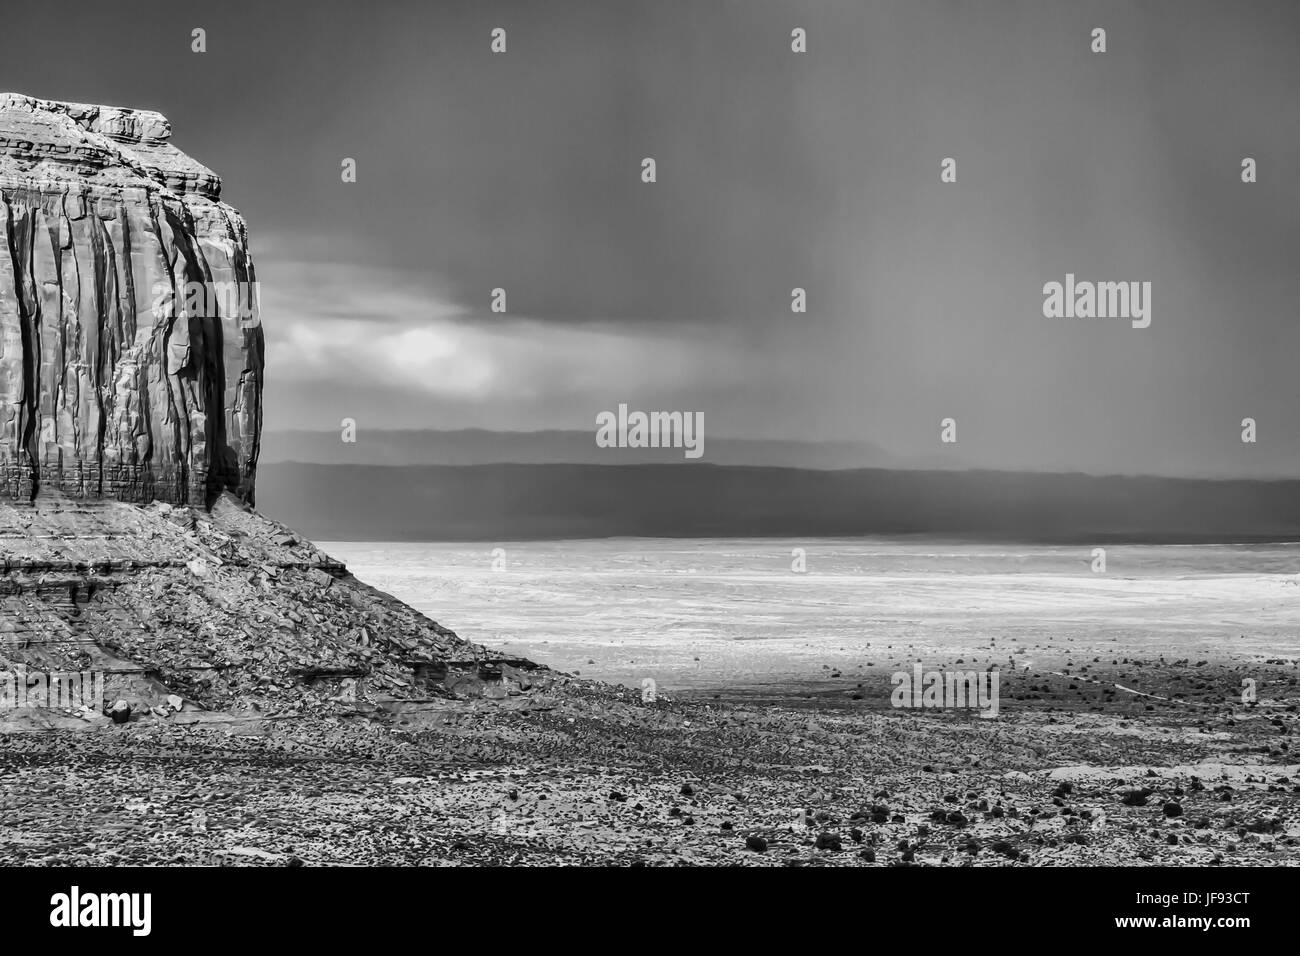 A single , majestic butte and stormy skies -Landscape- Monument Valley, Arizona Stock Photo